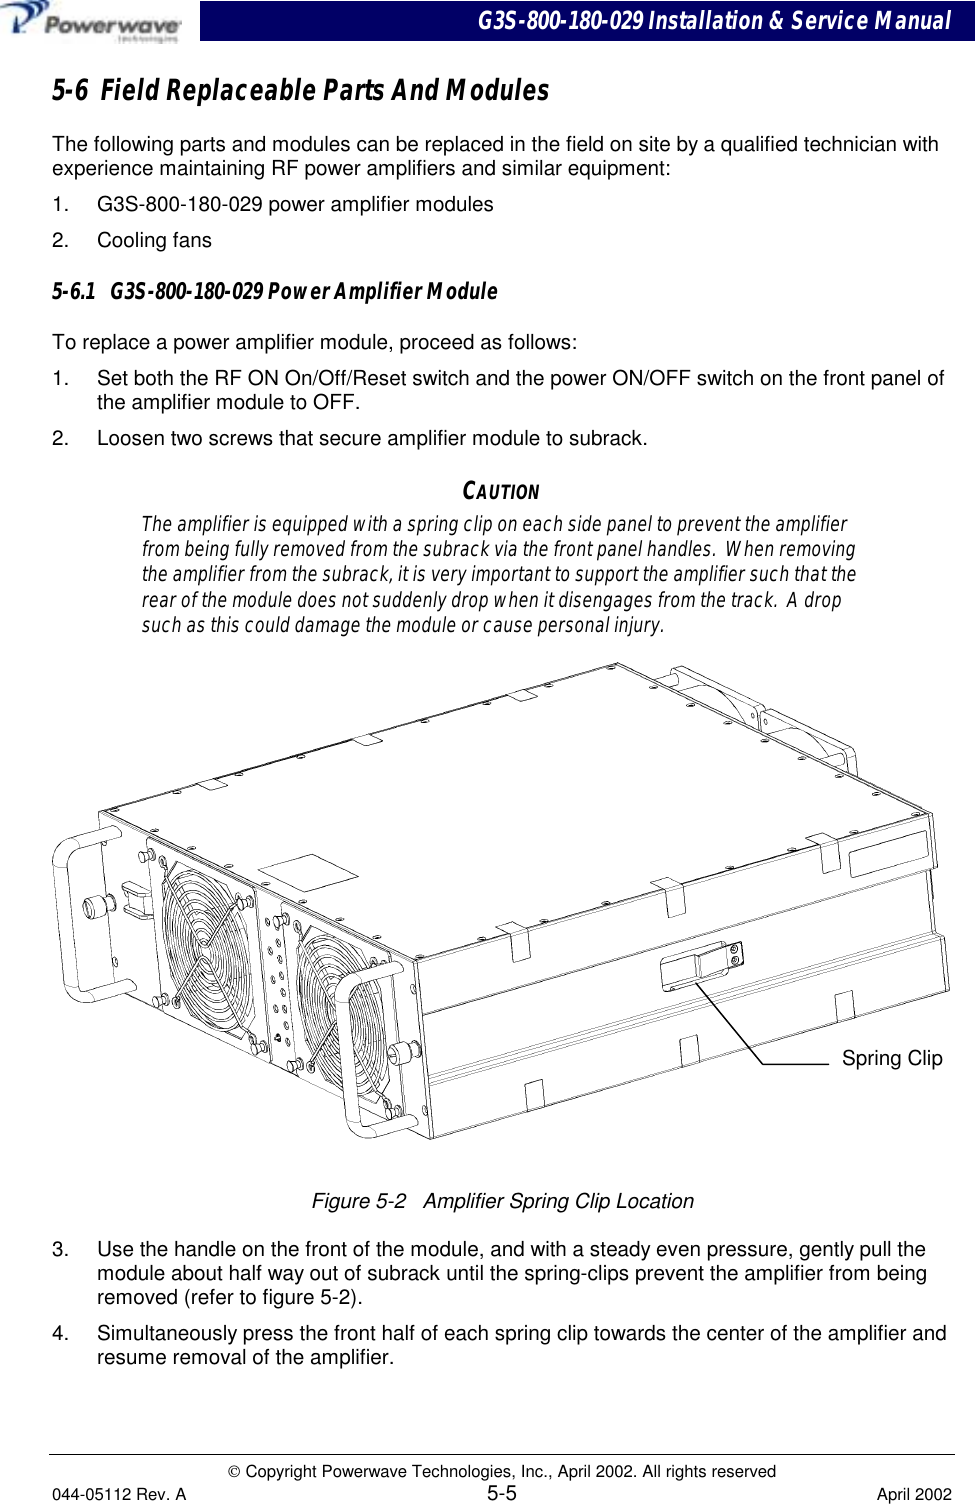 G3S-800-180-029 Installation &amp; Service Manual Copyright Powerwave Technologies, Inc., April 2002. All rights reserved044-05112 Rev. A 5-5 April 20025-6  Field Replaceable Parts And ModulesThe following parts and modules can be replaced in the field on site by a qualified technician withexperience maintaining RF power amplifiers and similar equipment:1.  G3S-800-180-029 power amplifier modules2. Cooling fans5-6.1   G3S-800-180-029 Power Amplifier ModuleTo replace a power amplifier module, proceed as follows:1.  Set both the RF ON On/Off/Reset switch and the power ON/OFF switch on the front panel ofthe amplifier module to OFF.2.  Loosen two screws that secure amplifier module to subrack.CAUTIONThe amplifier is equipped with a spring clip on each side panel to prevent the amplifierfrom being fully removed from the subrack via the front panel handles.  When removingthe amplifier from the subrack, it is very important to support the amplifier such that therear of the module does not suddenly drop when it disengages from the track.  A dropsuch as this could damage the module or cause personal injury.Figure 5-2   Amplifier Spring Clip Location3.  Use the handle on the front of the module, and with a steady even pressure, gently pull themodule about half way out of subrack until the spring-clips prevent the amplifier from beingremoved (refer to figure 5-2).4.  Simultaneously press the front half of each spring clip towards the center of the amplifier andresume removal of the amplifier.Spring Clip